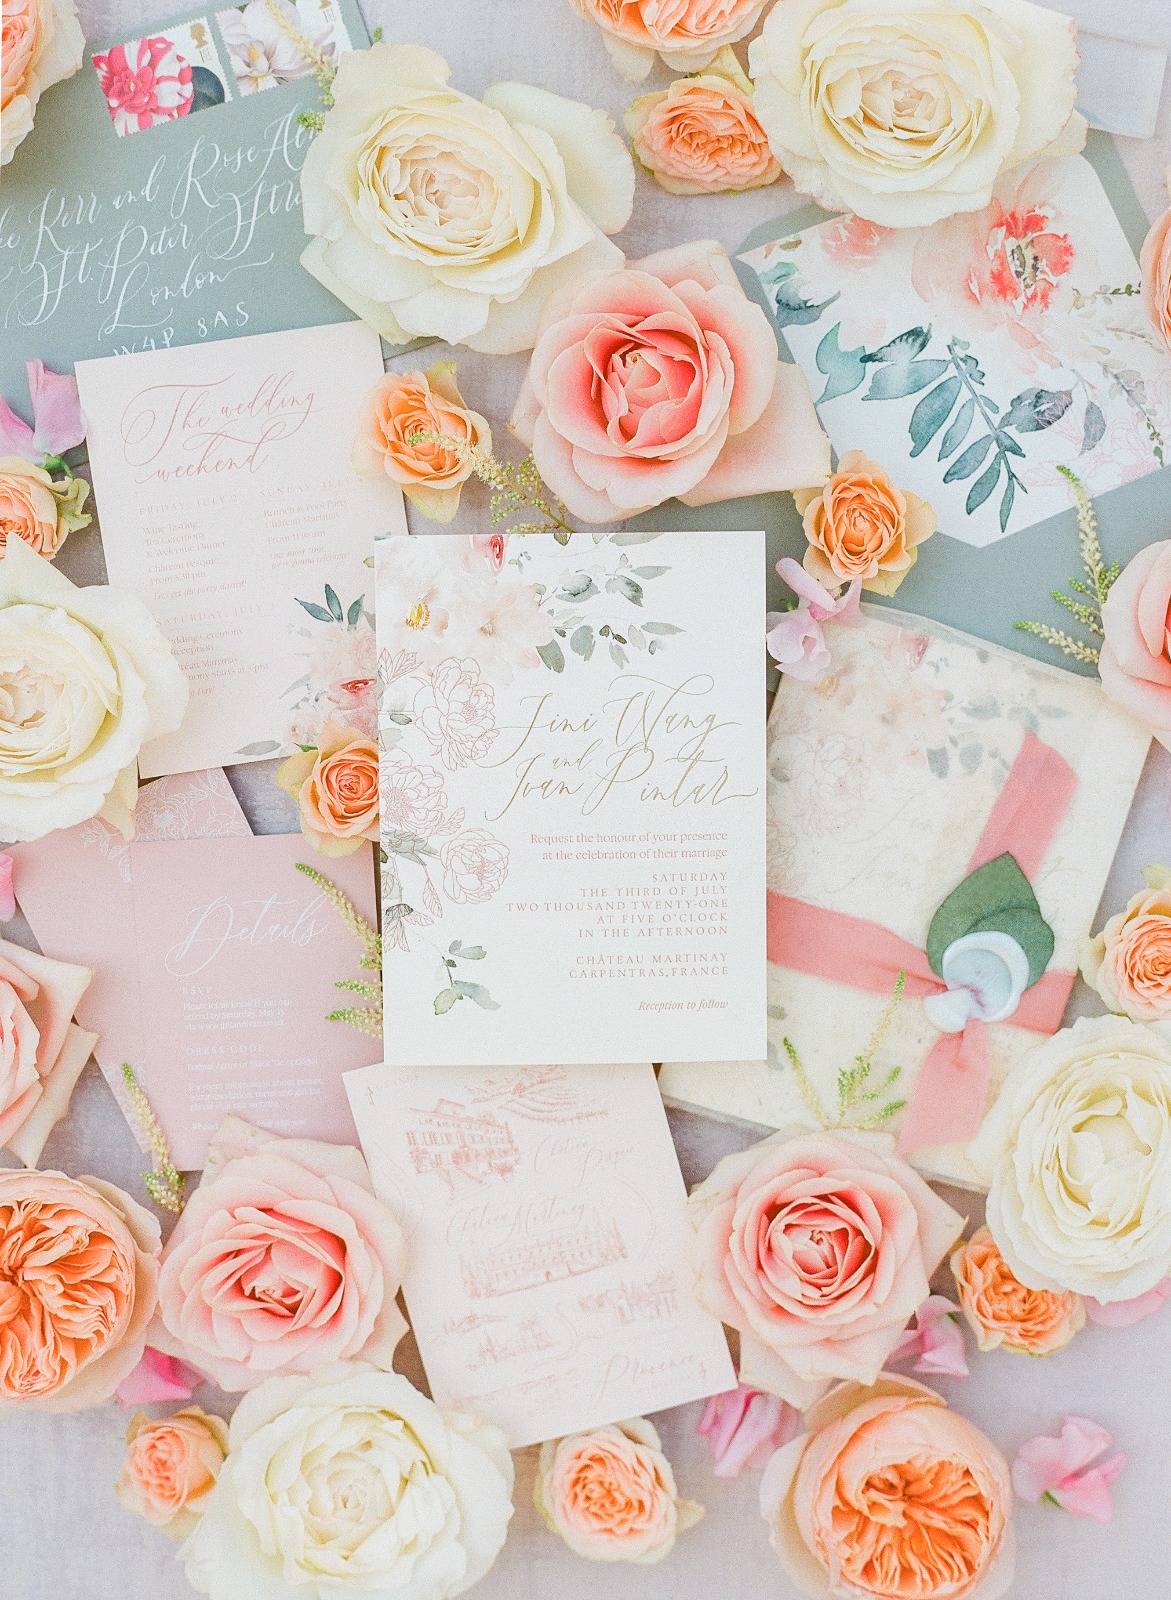 Chateau Martinay stationery - Wedding Planner Provence